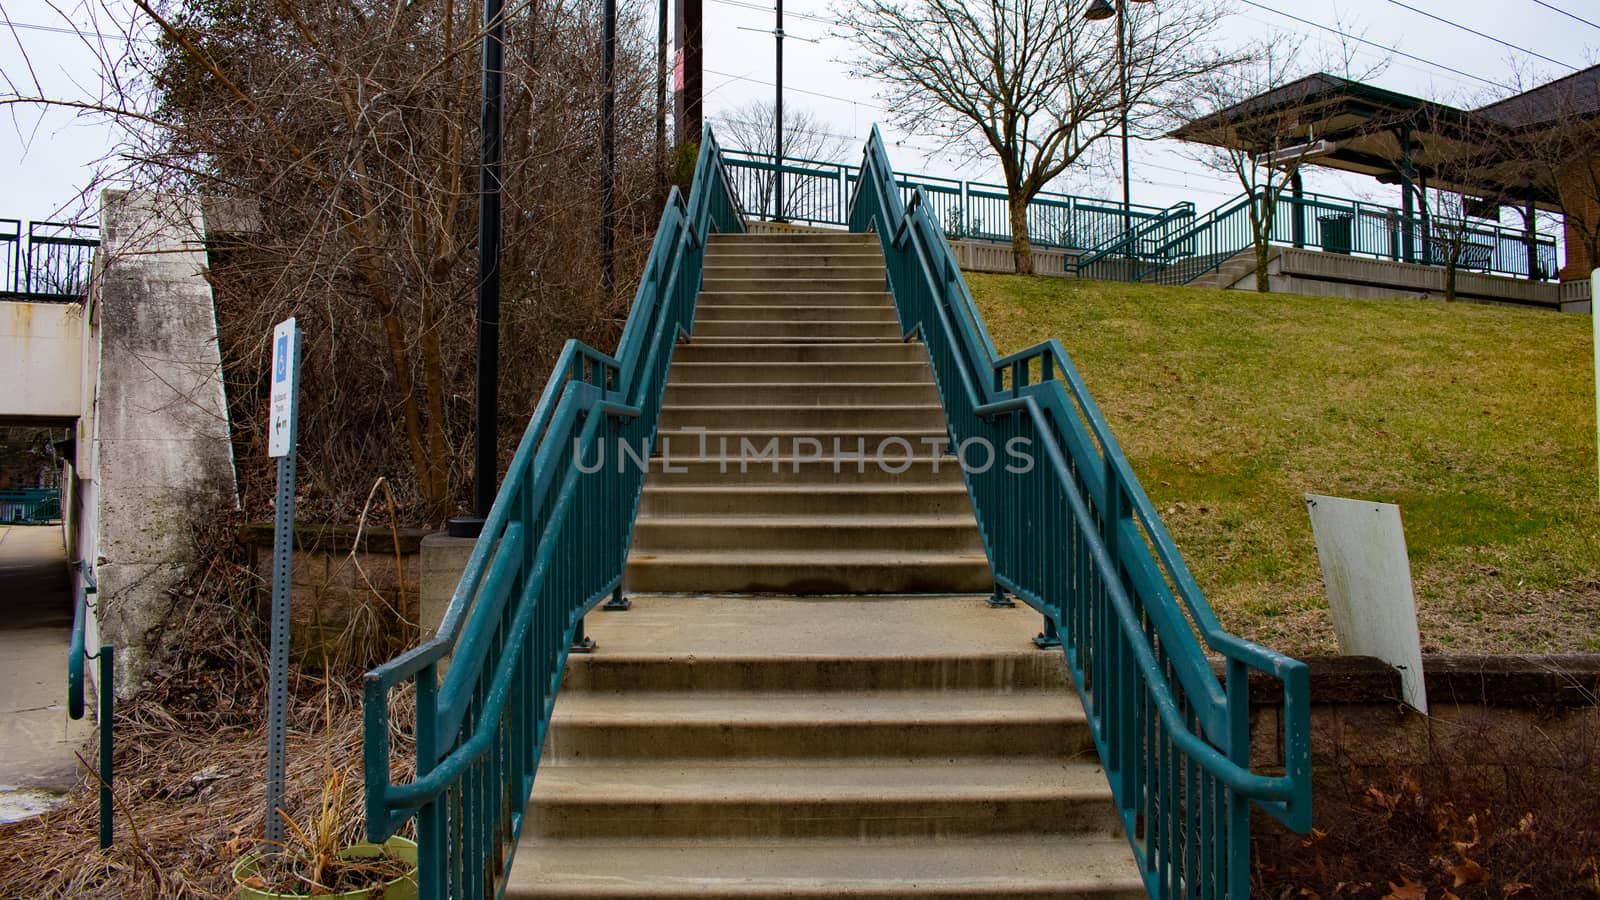 Concrete Steps Leading Up to a Train station With Blue Railings  by bju12290